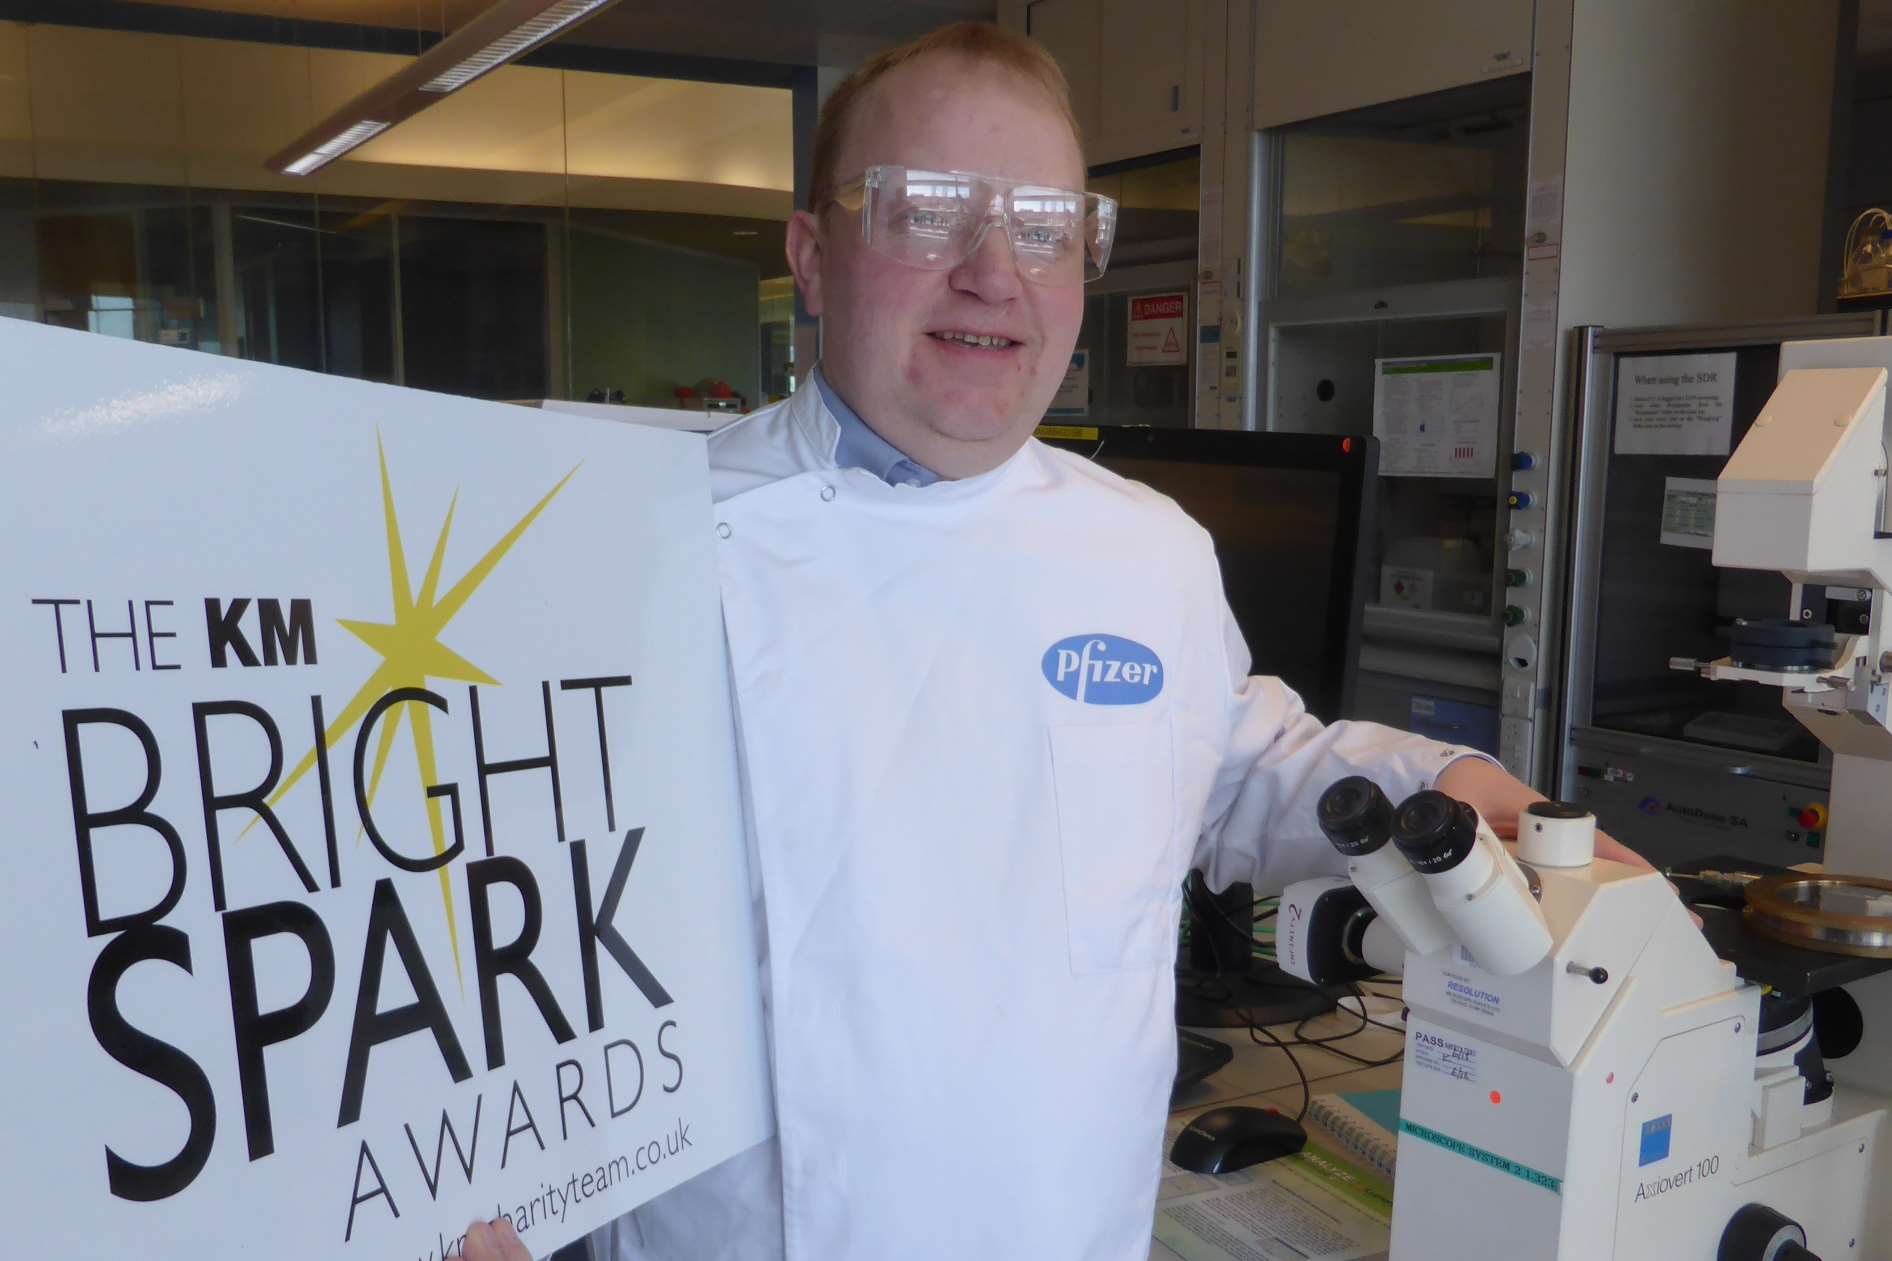 Robert Crook, Senior Director for Chemical Research and Development at Pfizer, announces support for the KM Bright Spark Awards 2016